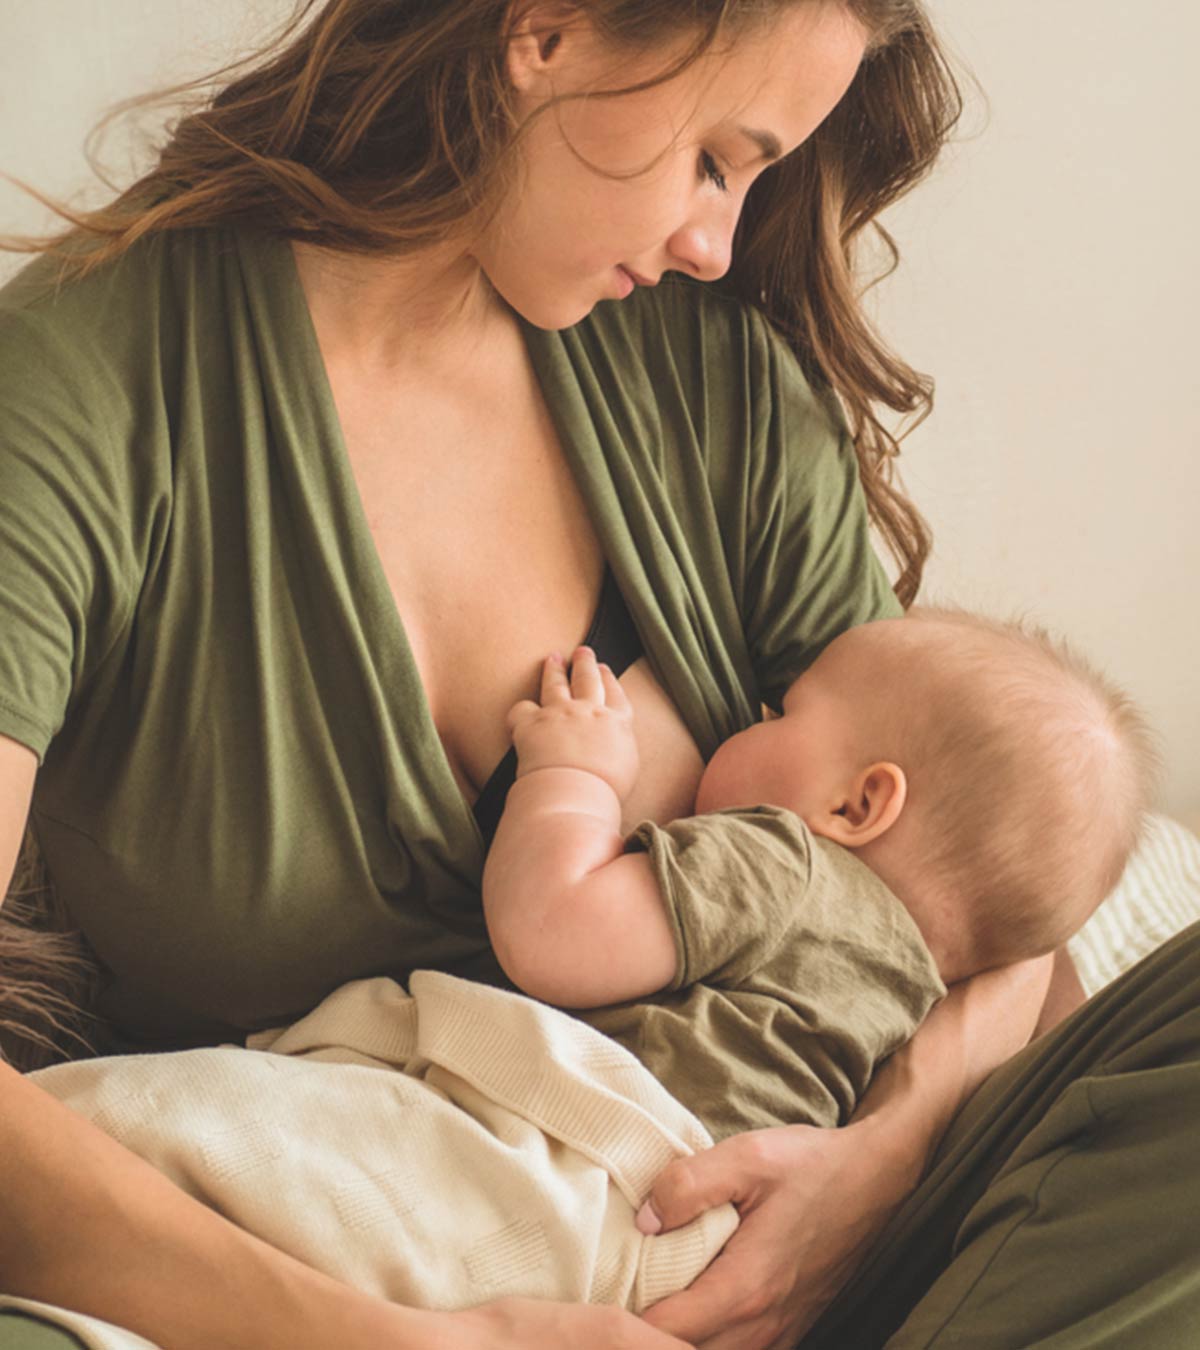 The ‘Lose Weight By Breastfeeding’ Message Is Hurting Postpartum Moms